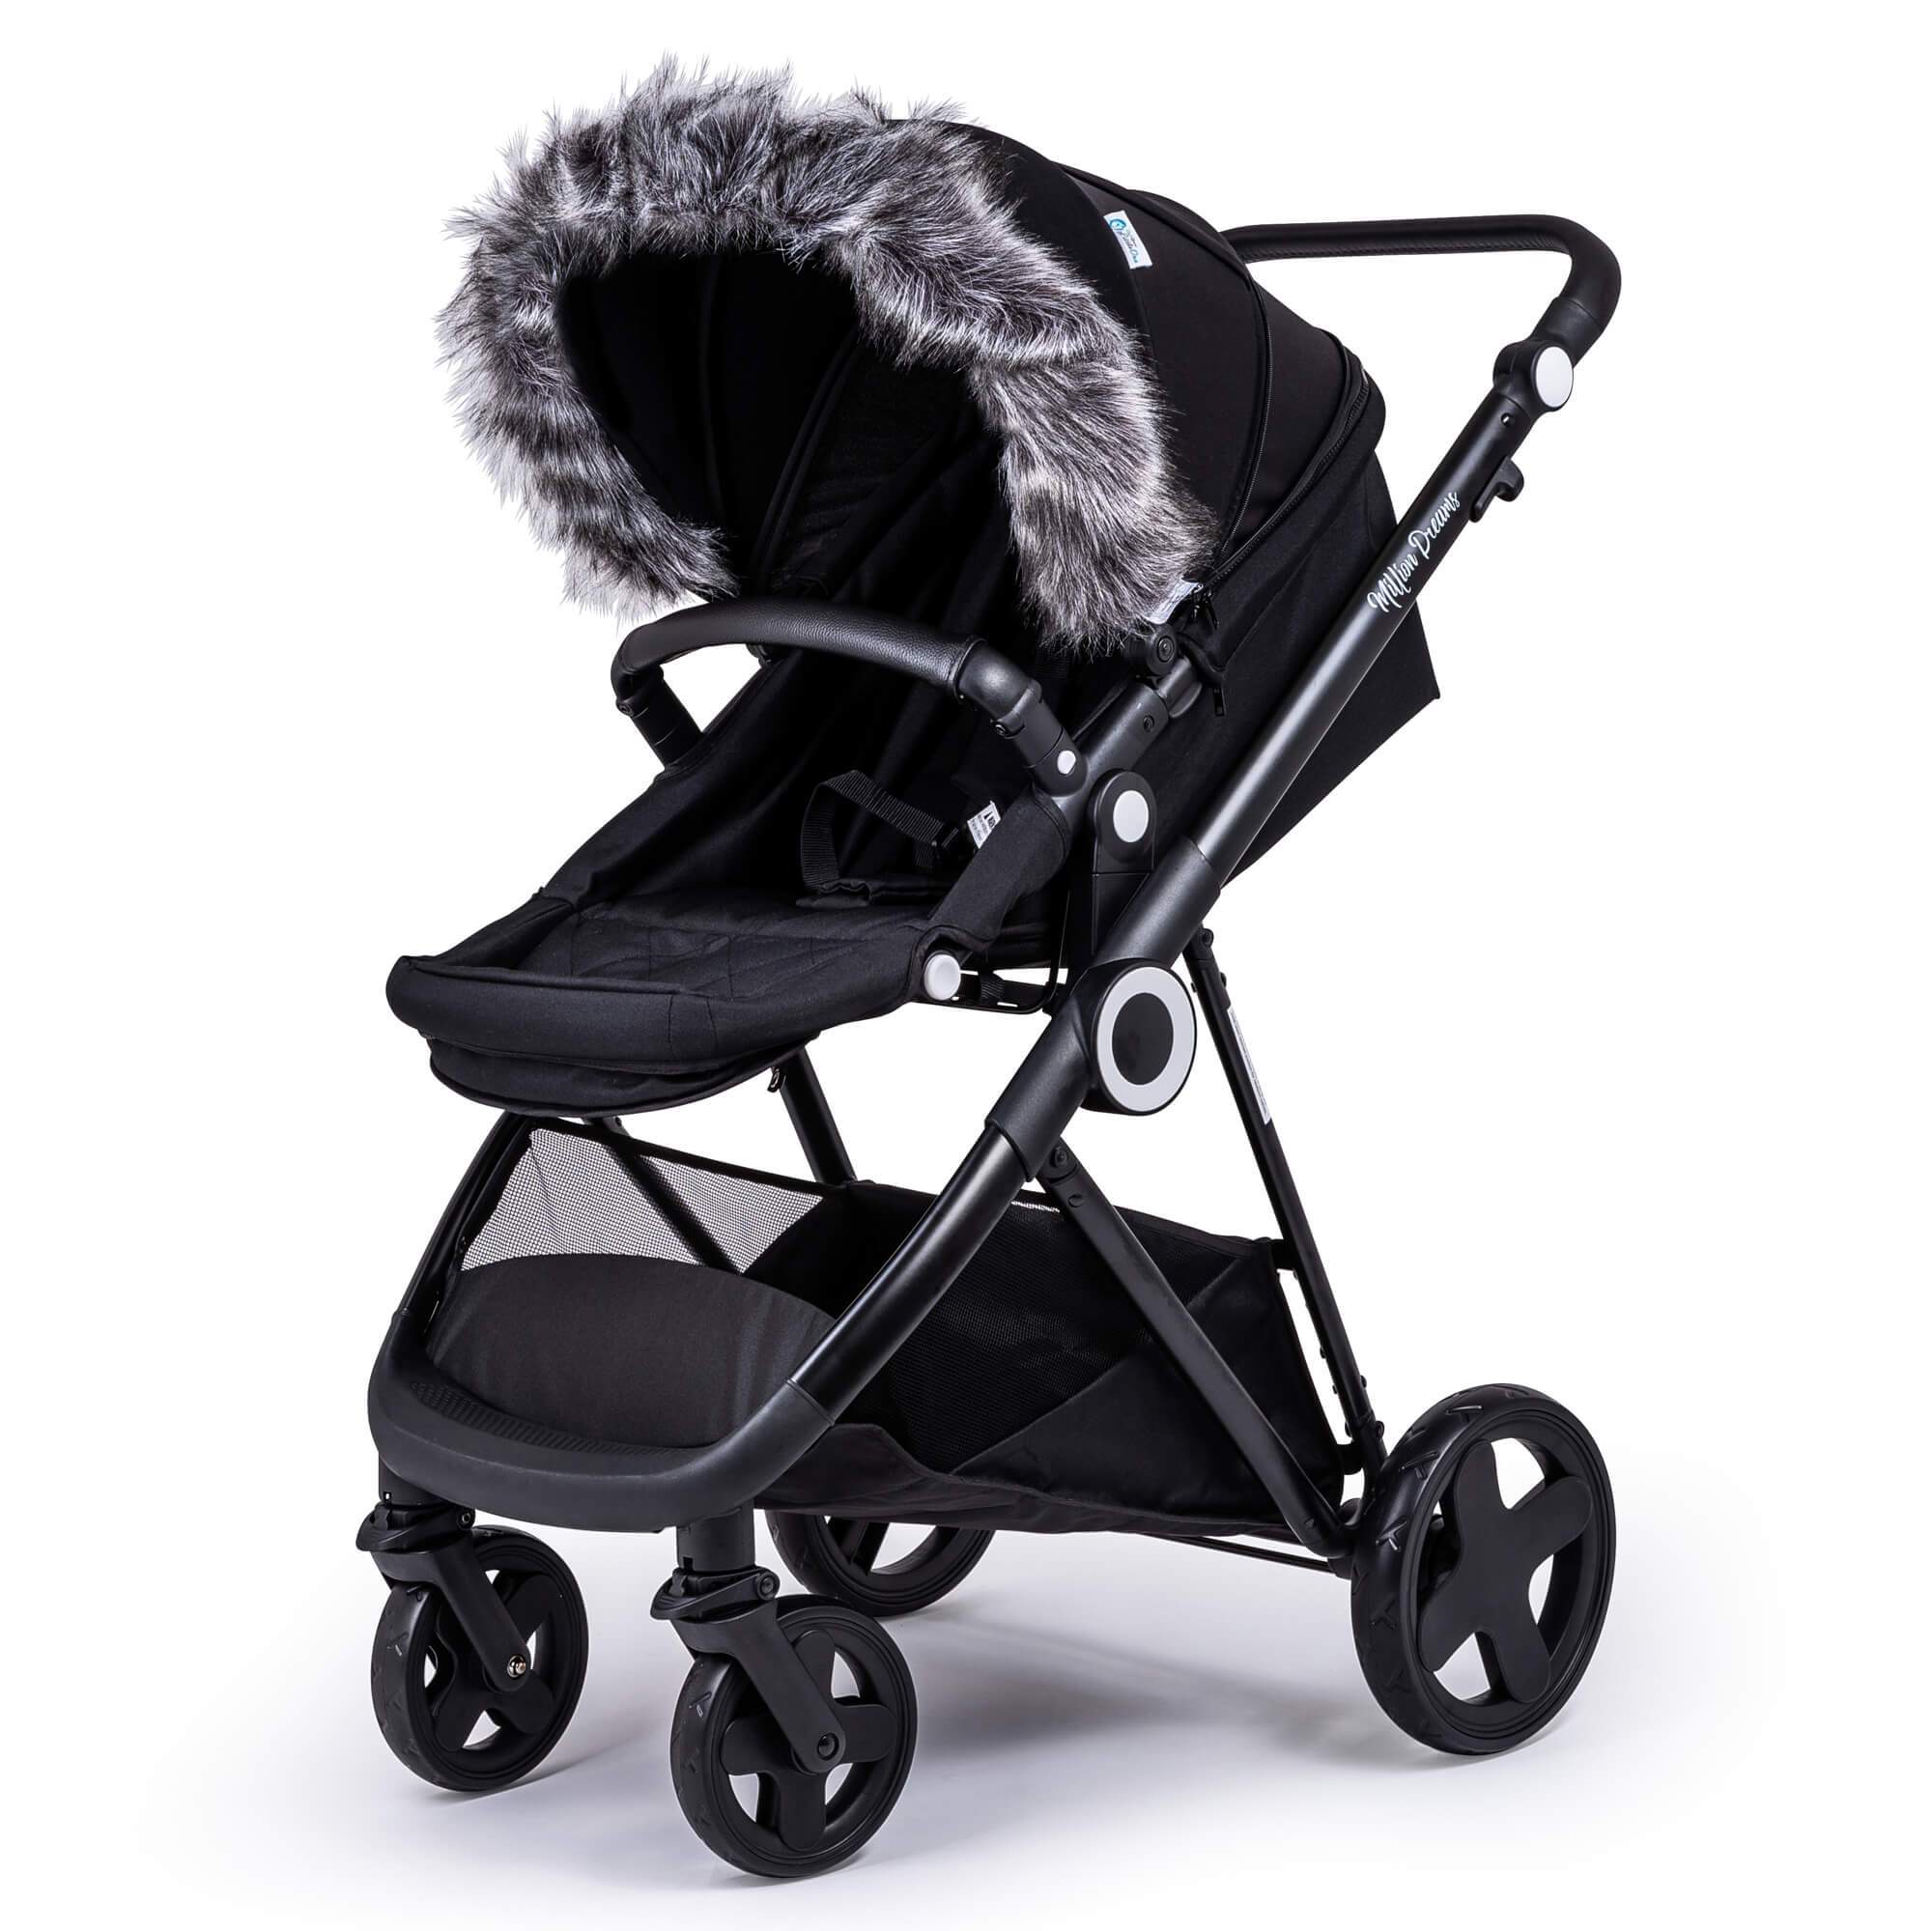 Pram Fur Hood Trim Attachment for Pushchair Compatible with DoBuggy - Dark Grey / Fits All Models | For Your Little One